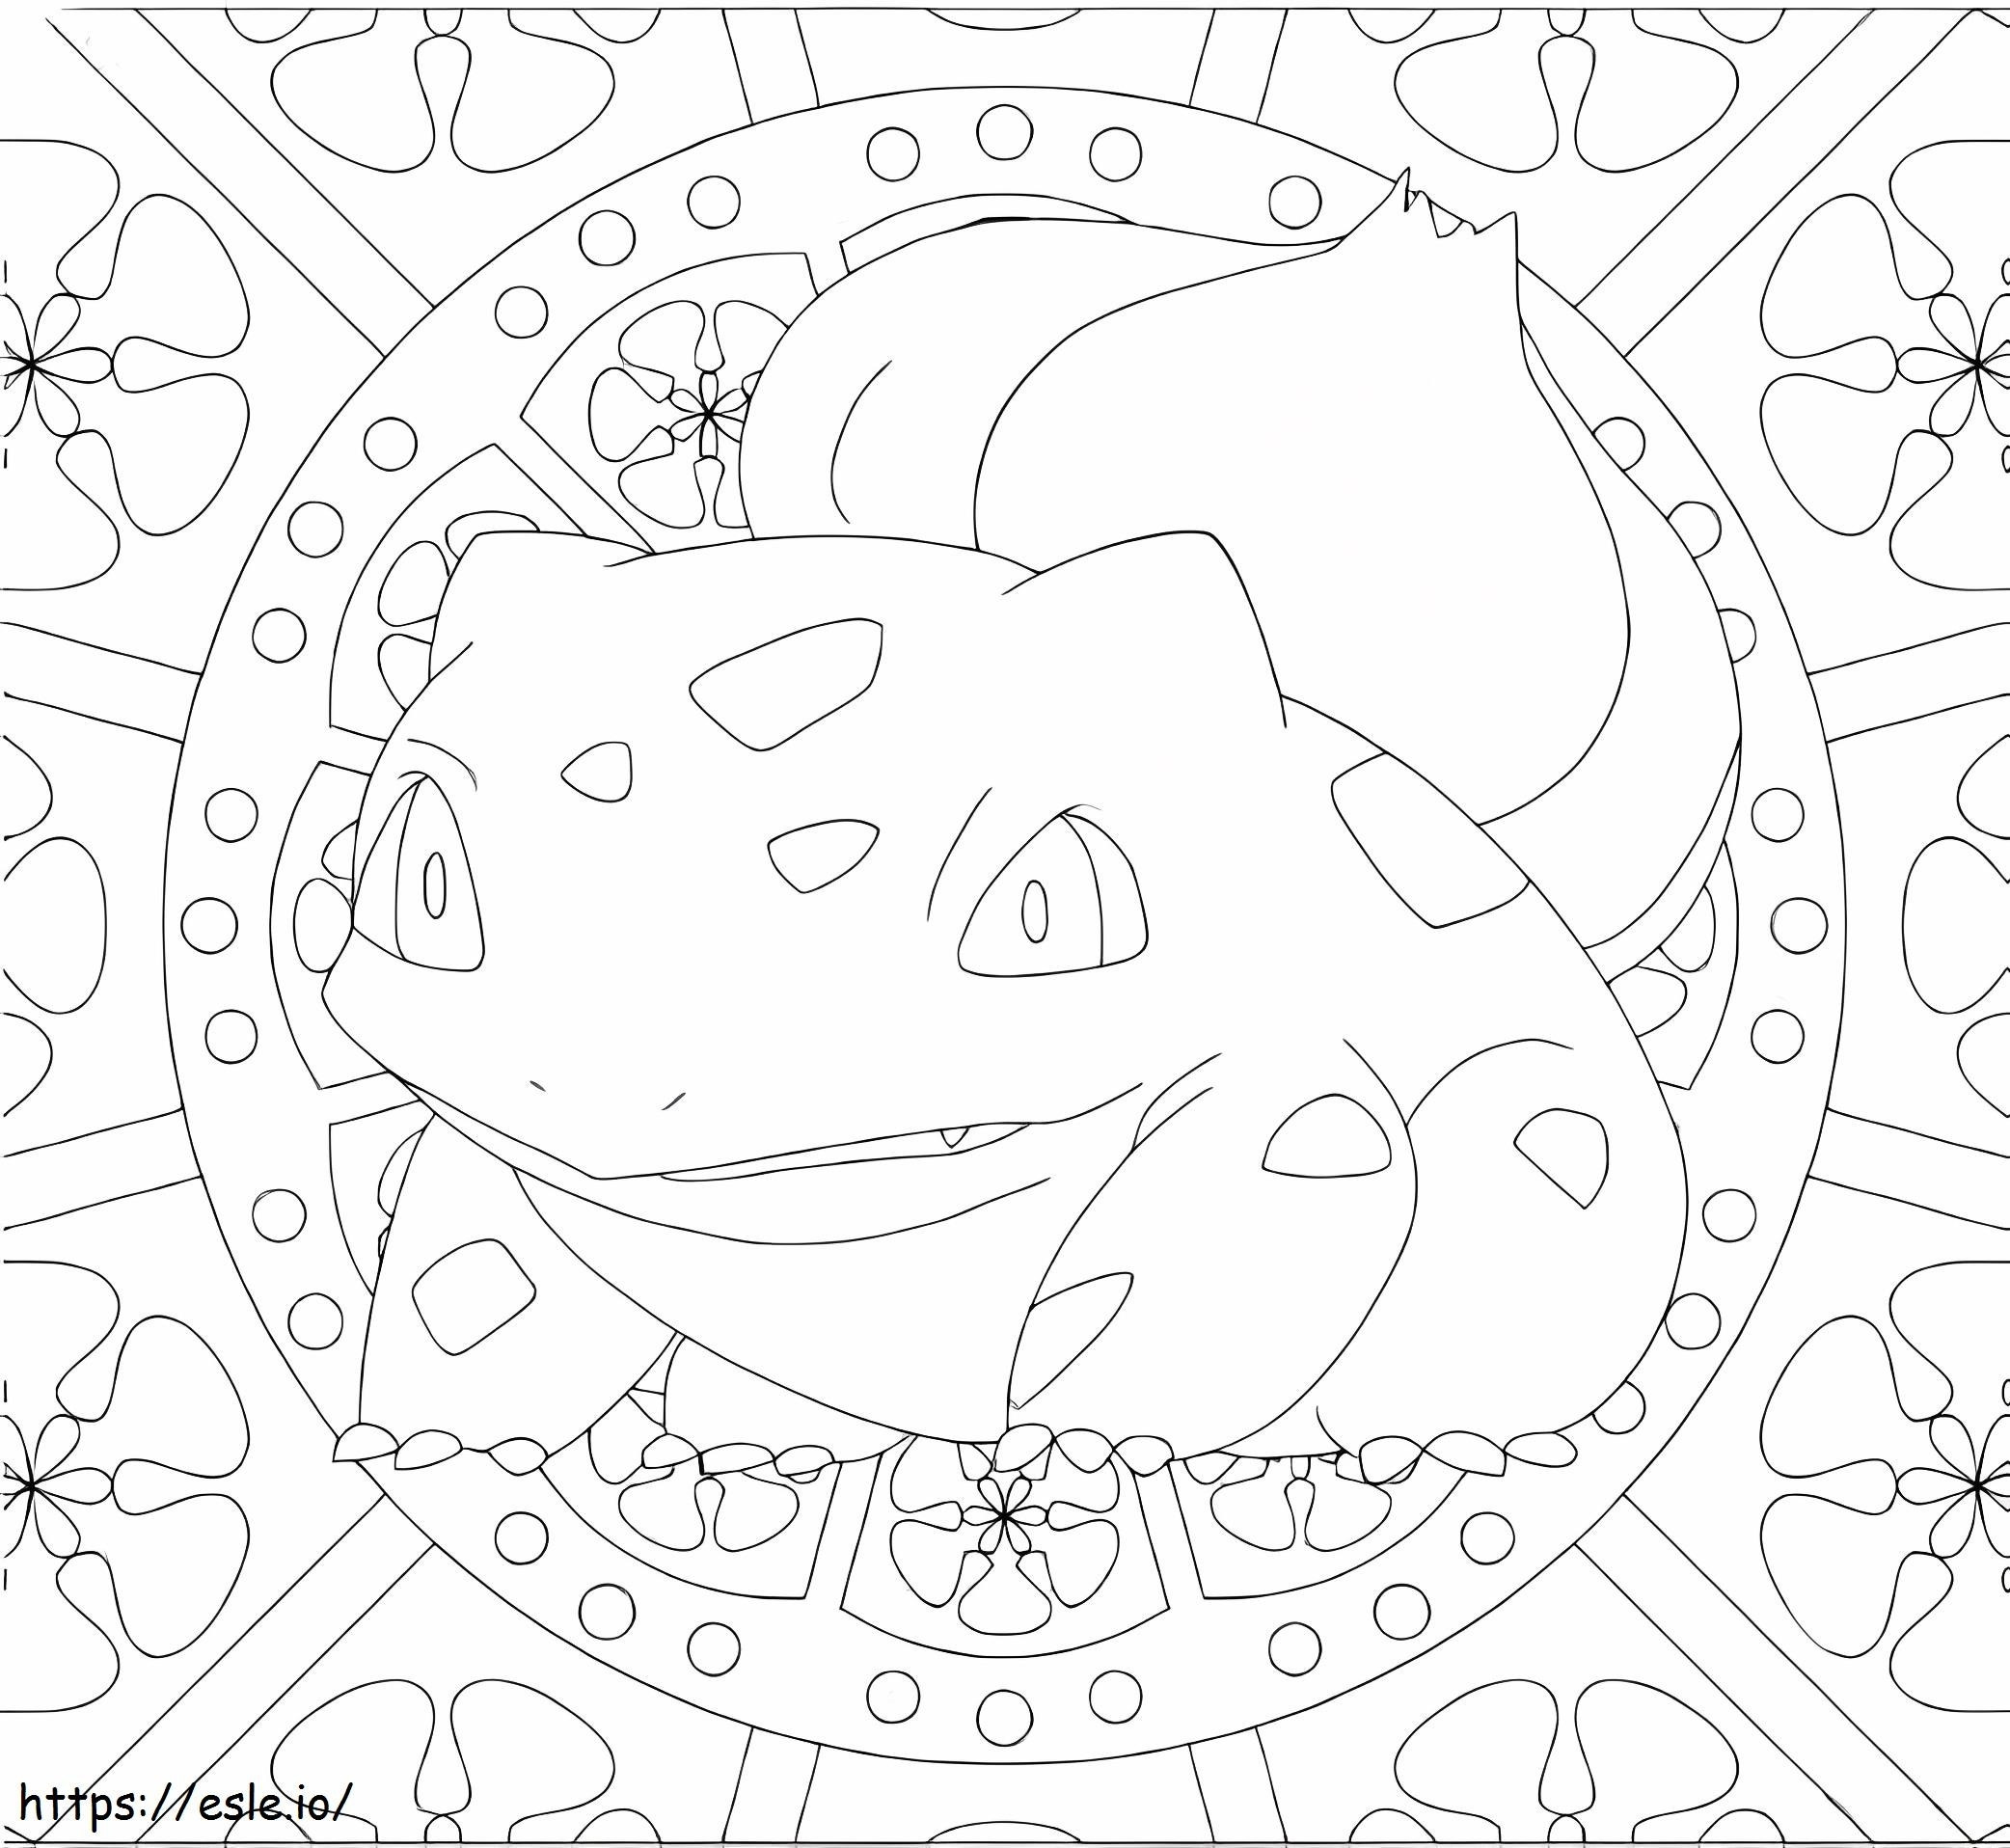 Bulbasaur 4 coloring page